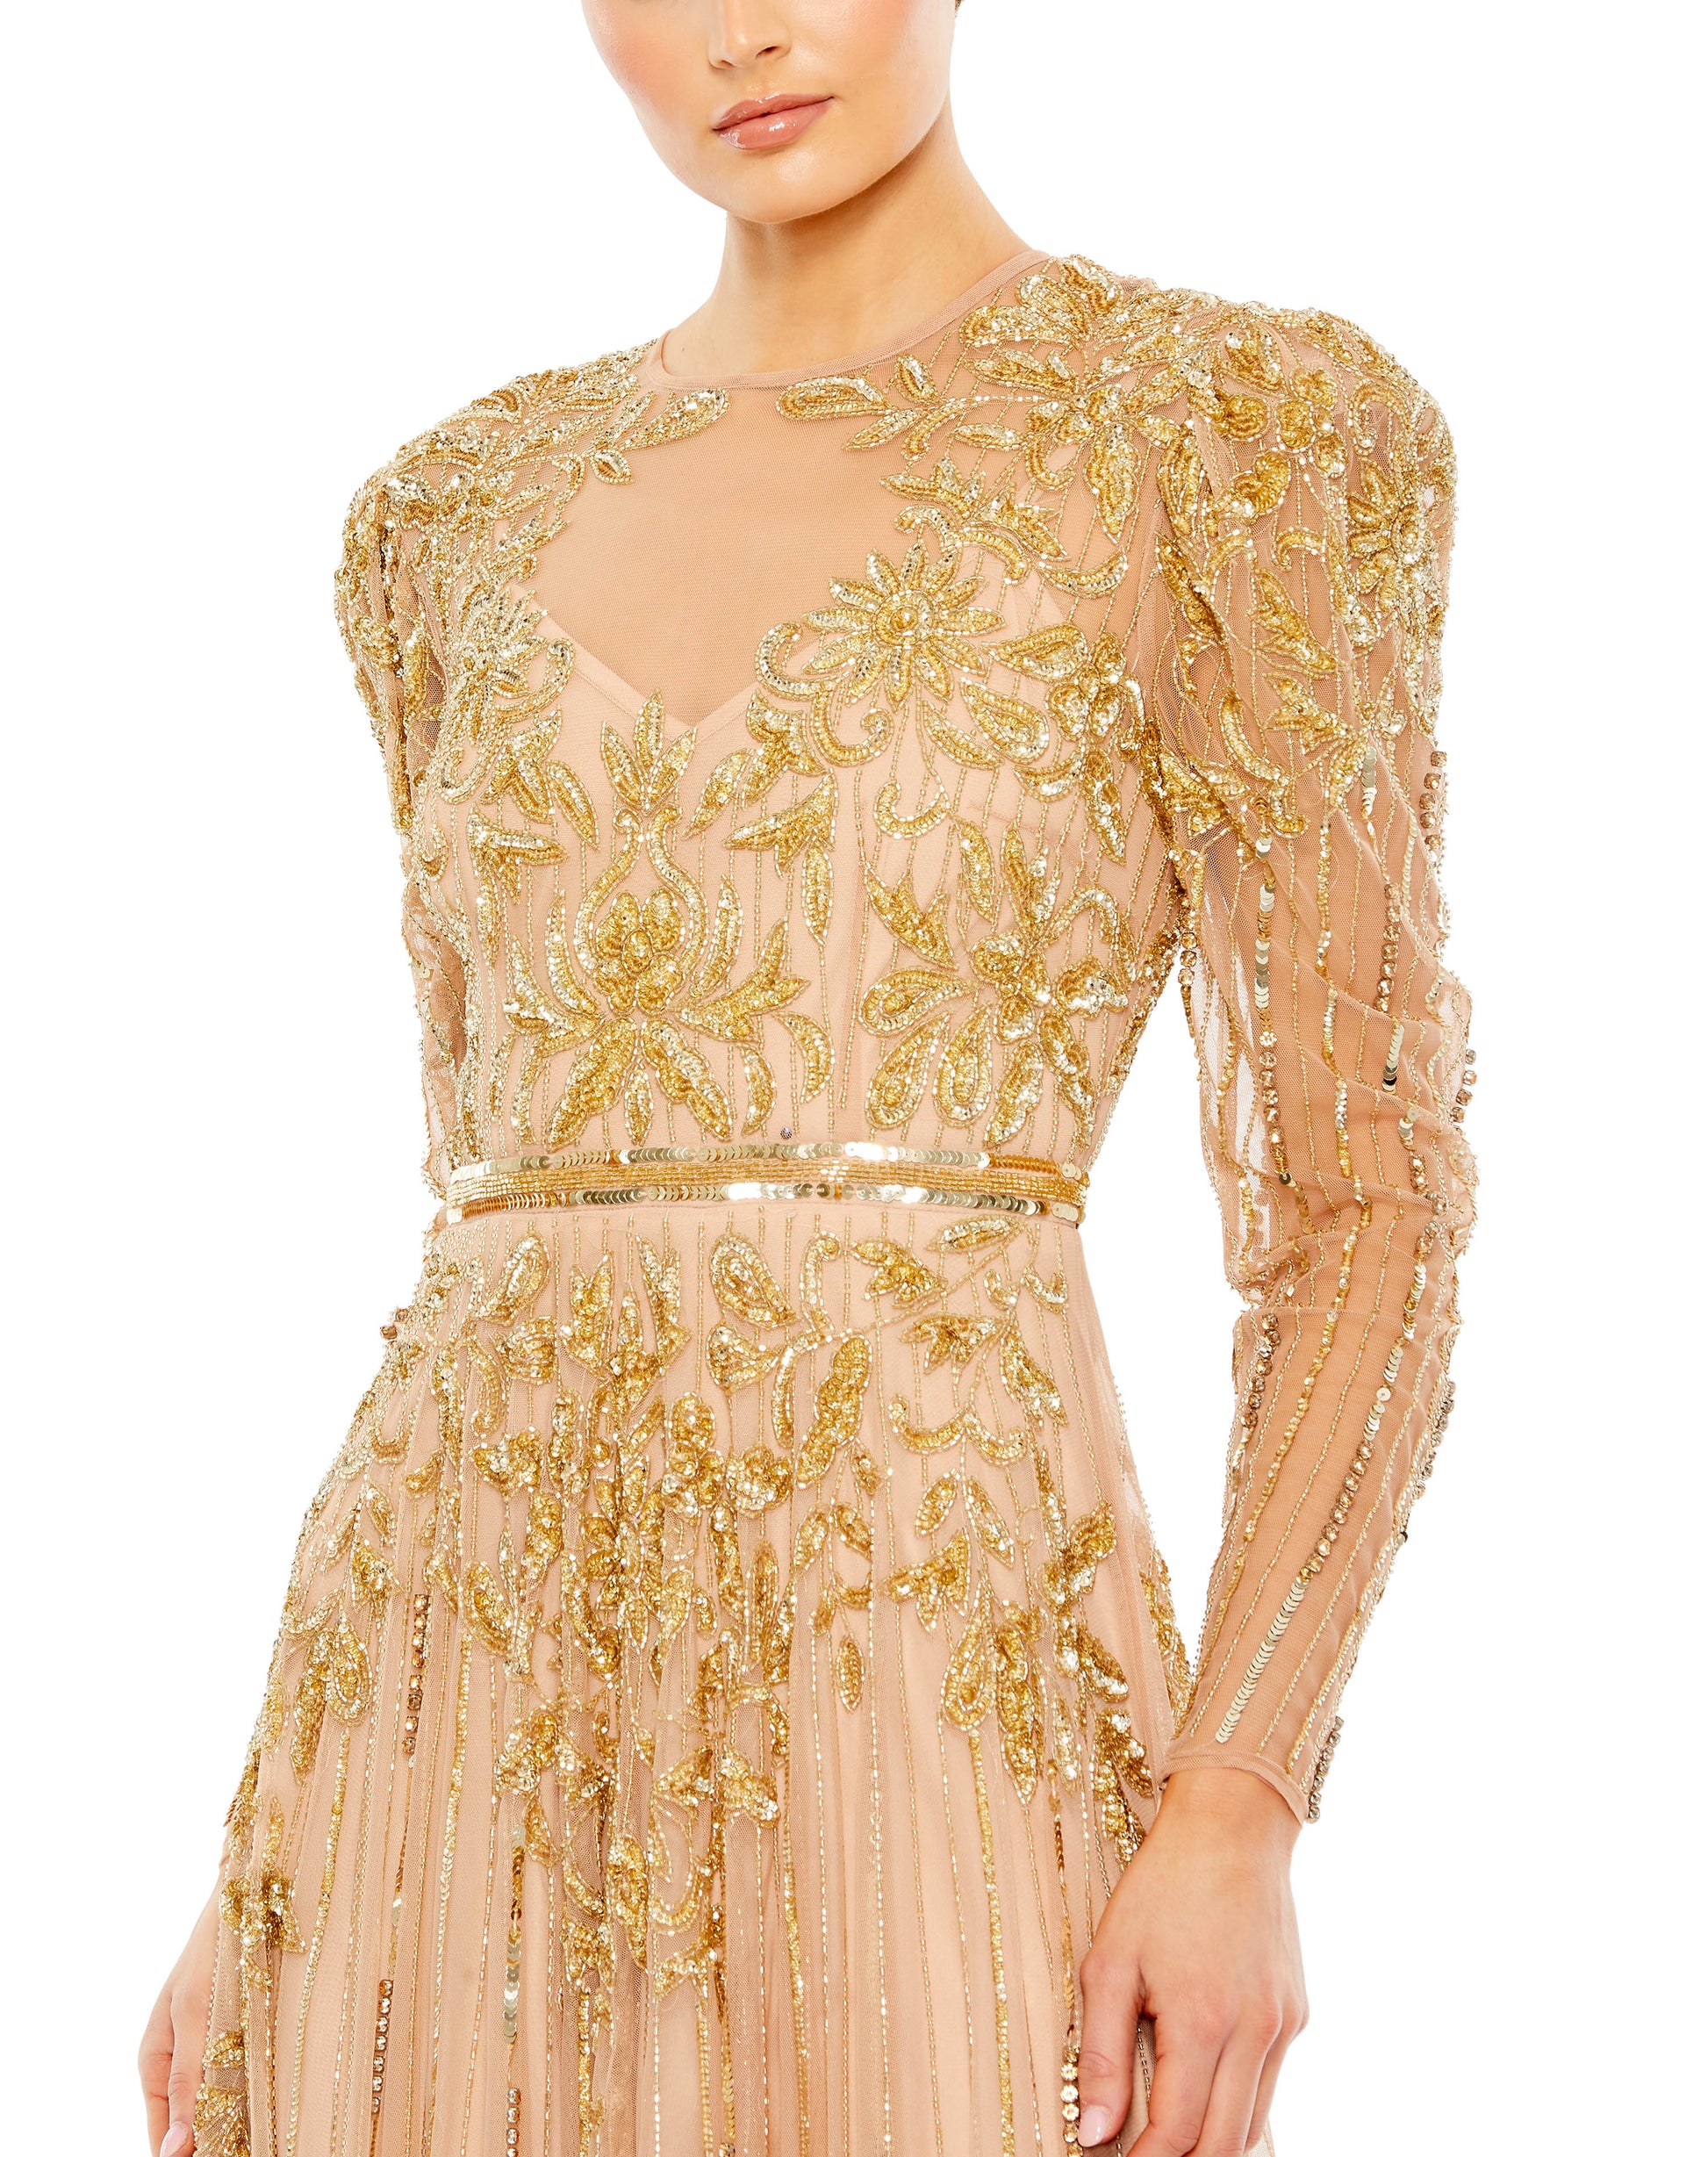 Mac Duggal Embellished mesh overlay; 100% polyester Partially lined through bodice; fully lined through skirt; sheer unlined sleeves High neckline Long puff sleeves Beaded waist detail Intricate floral detailing composed of hand-stitched sequins and beadi